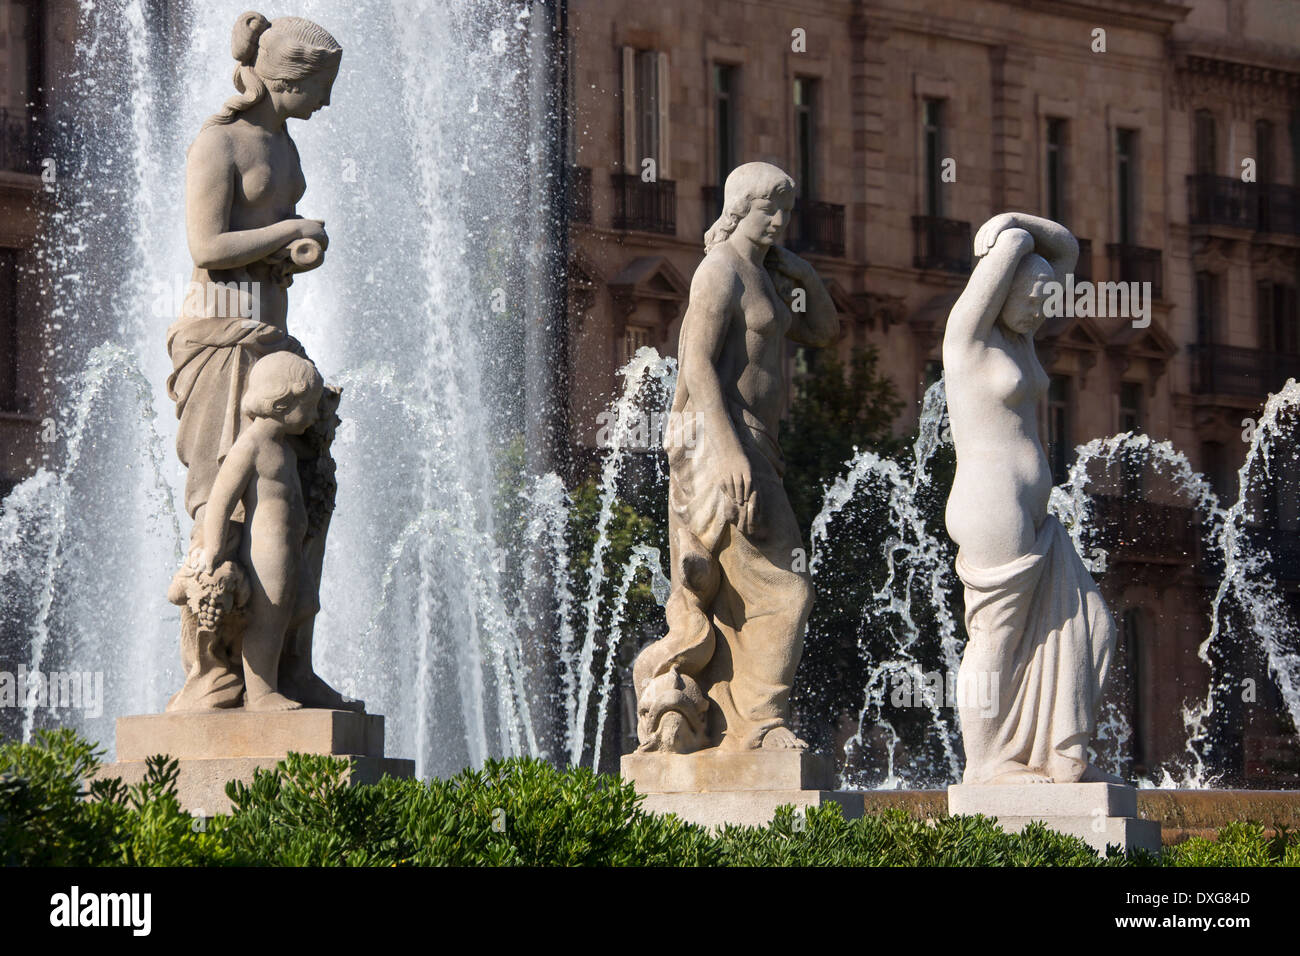 The fountains in Placa Catalunya in the city of Barcelona in the Catalonia region of Spain. Stock Photo